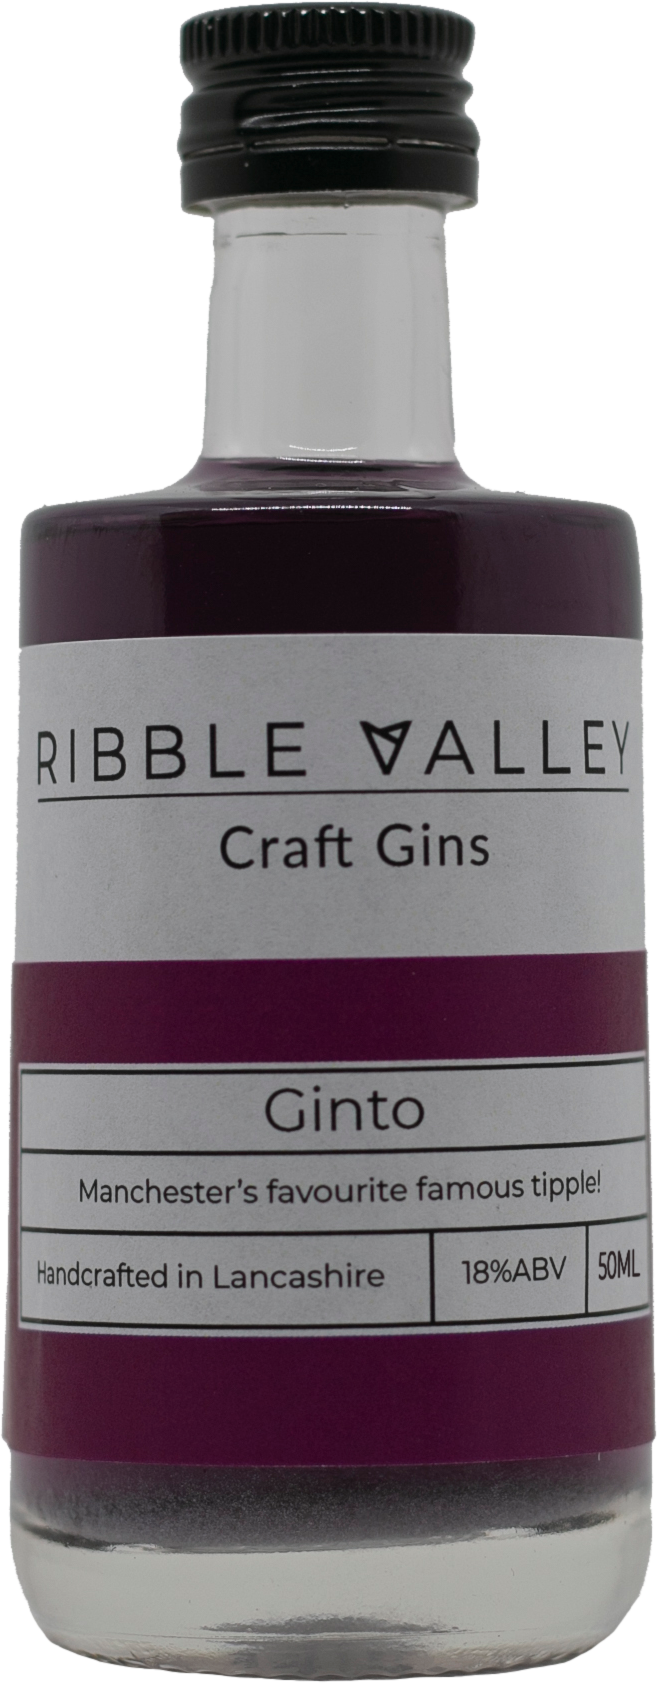 Shimmering Ginto Gin Liqueur